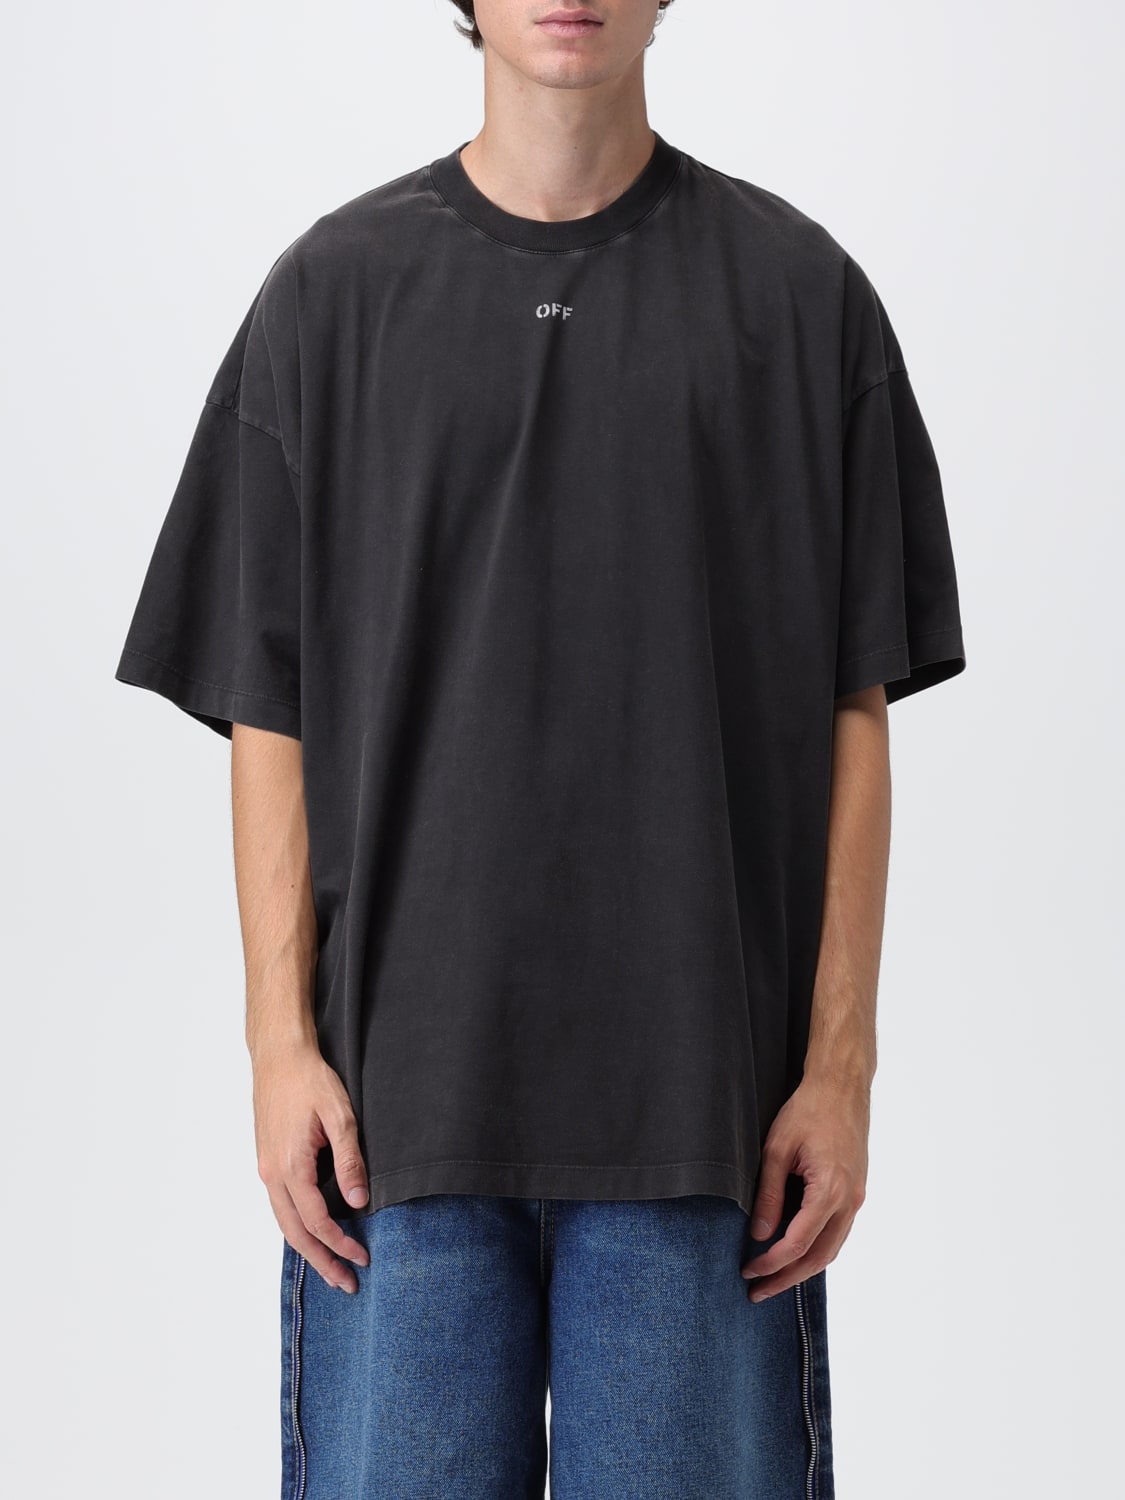 OFF-WHITE: T-shirt with mini t-shirt online Off-White logo - Black | OMAA161F23JER011 at